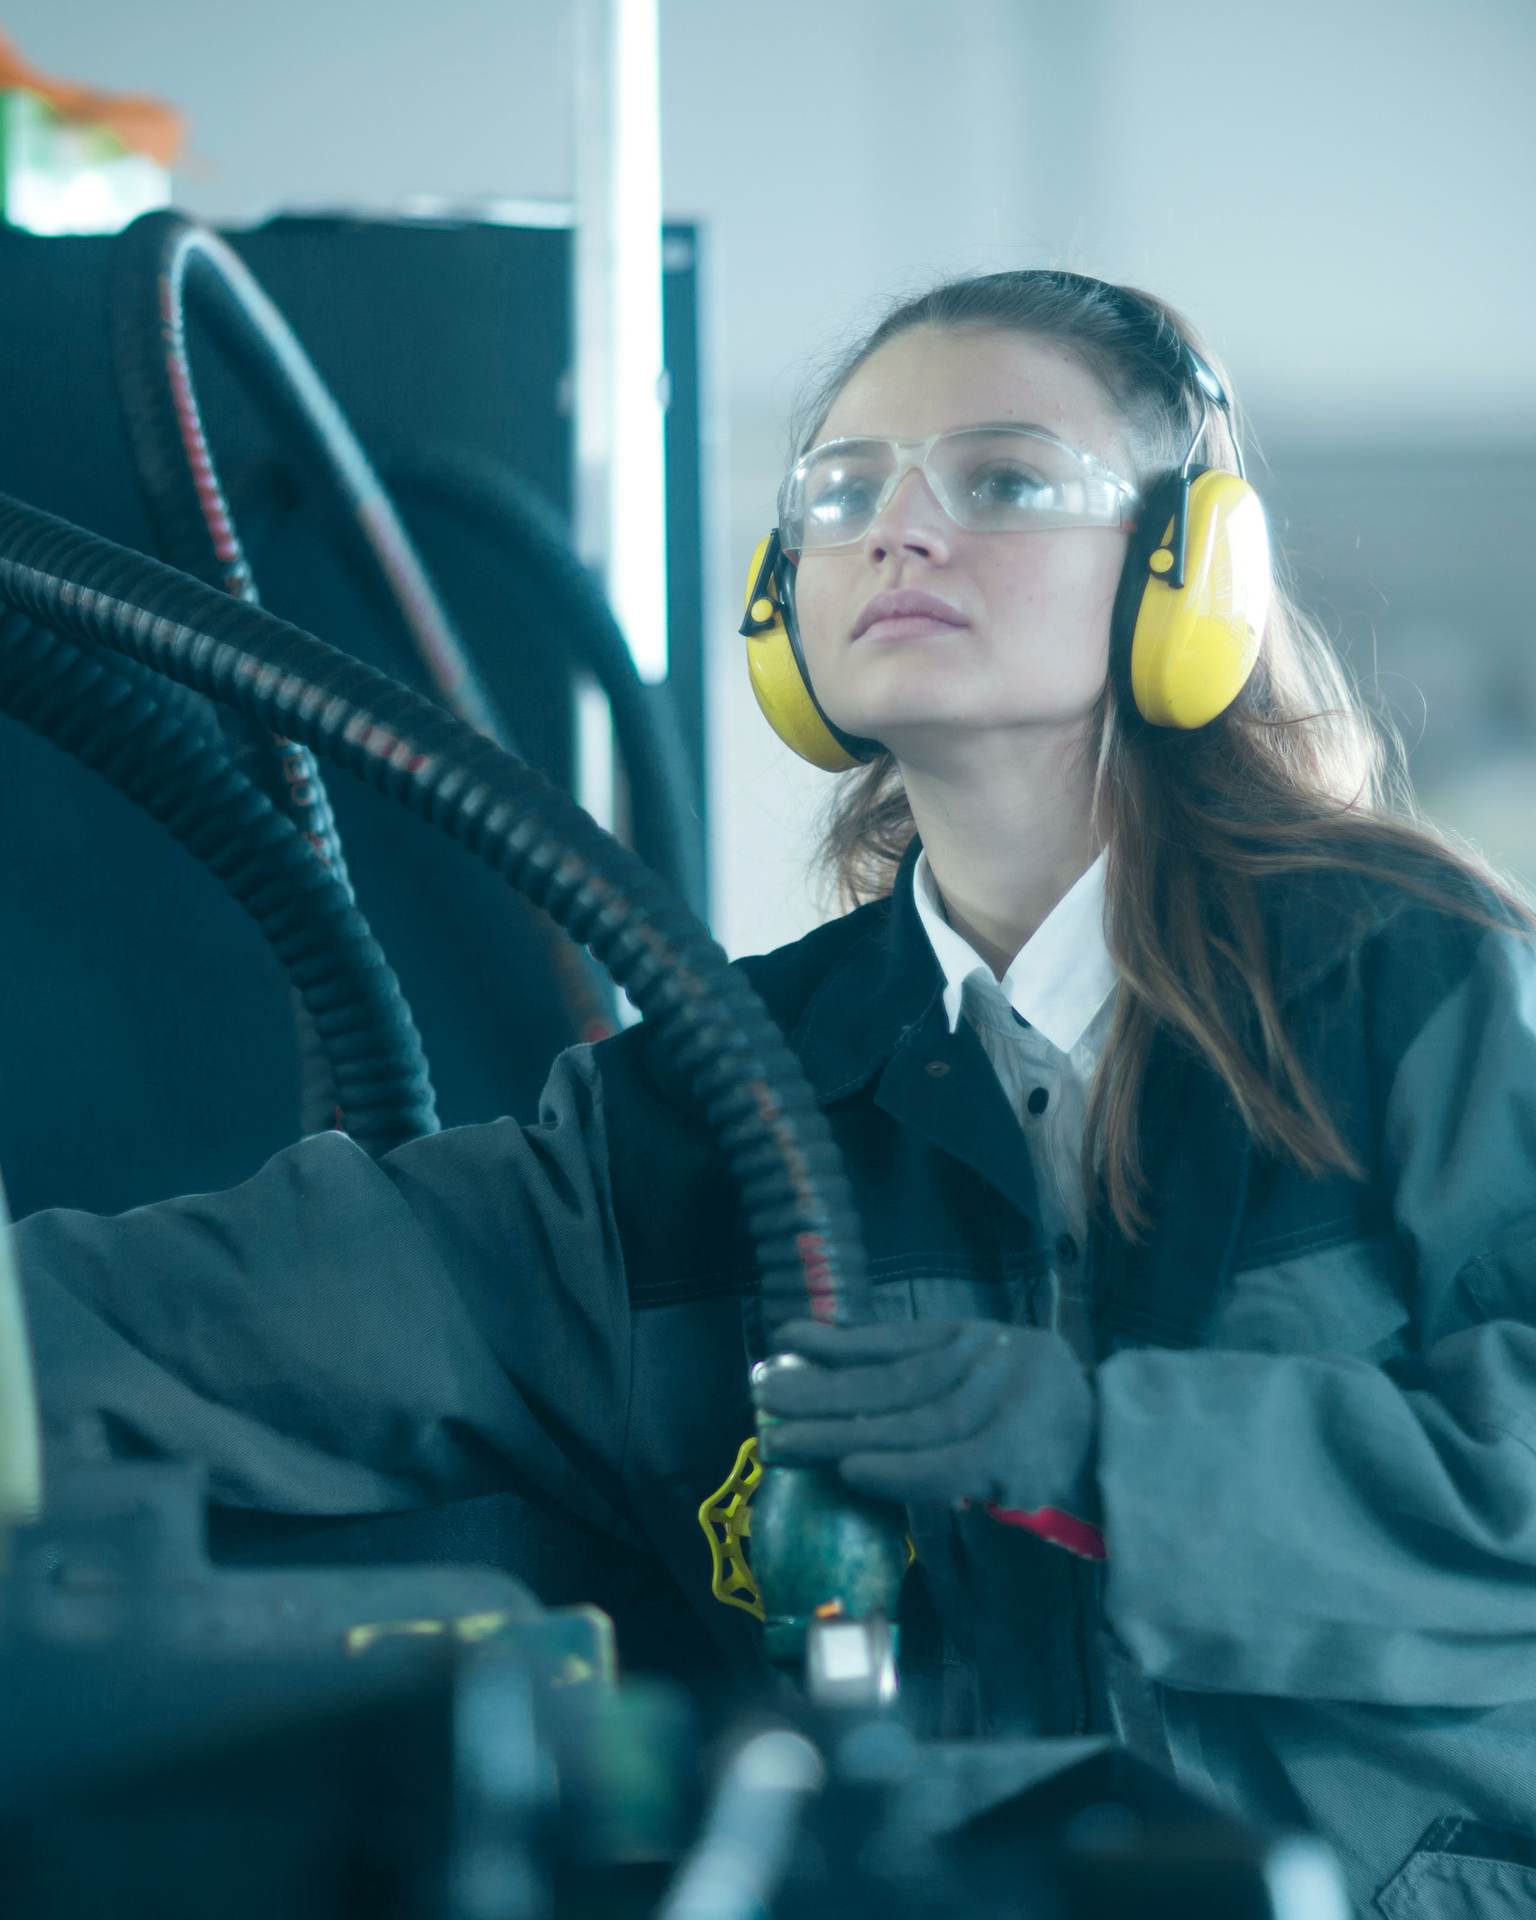 A woman wears hearing protection while working on an industrial machine.